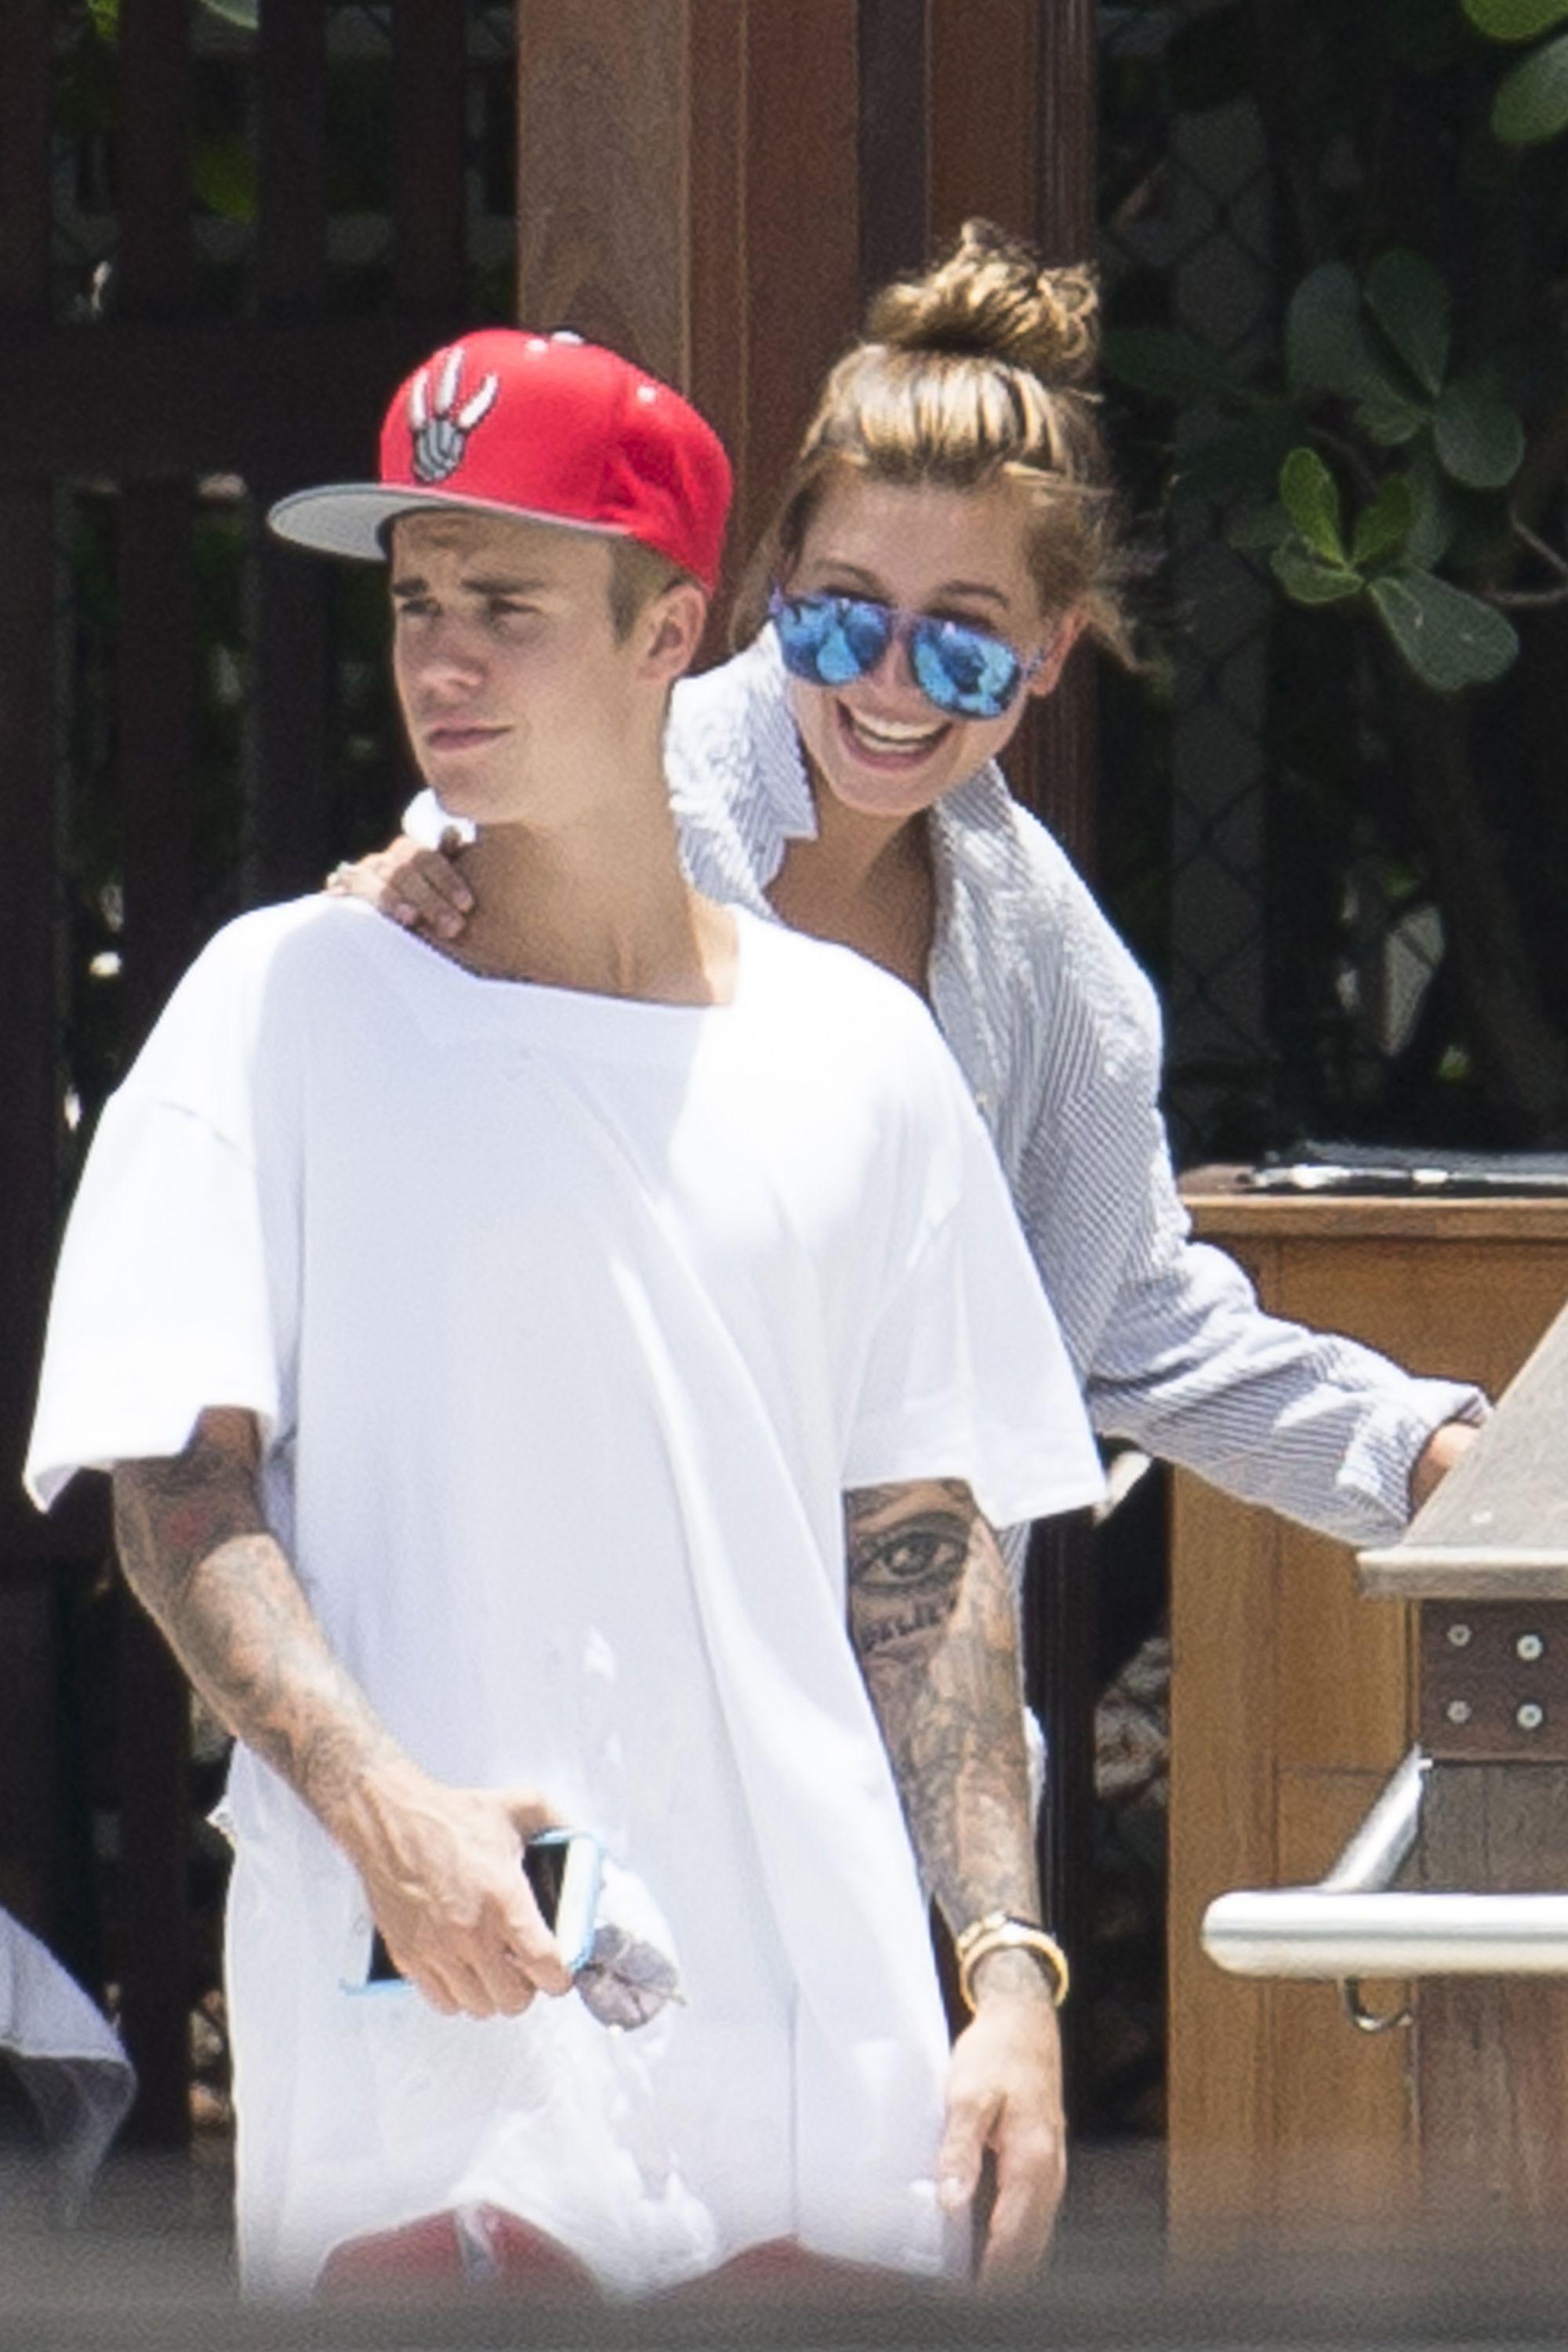 Hailey Baldwin and Justin Bieber's Relationship in Photo